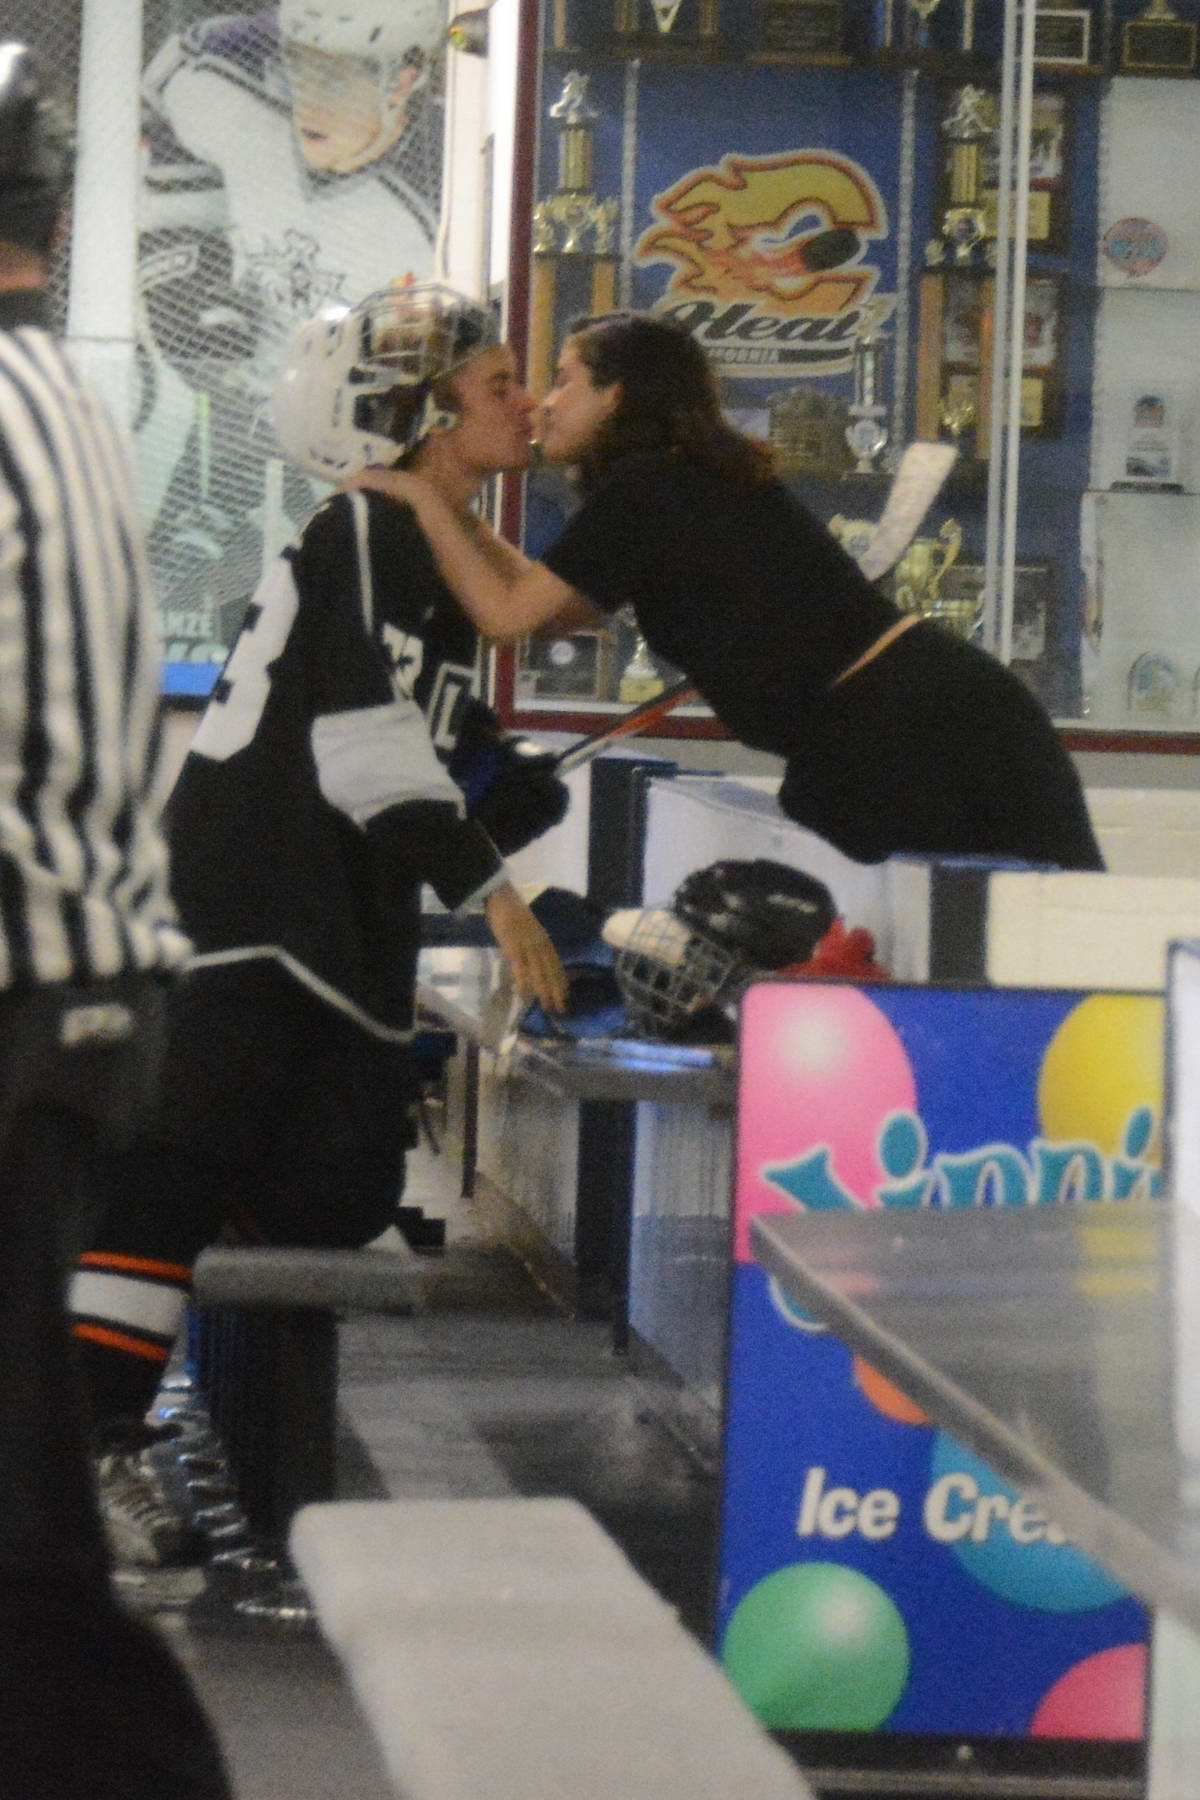 Selena Gomez Wears Justin Bieber's Hockey Jersey After His Game